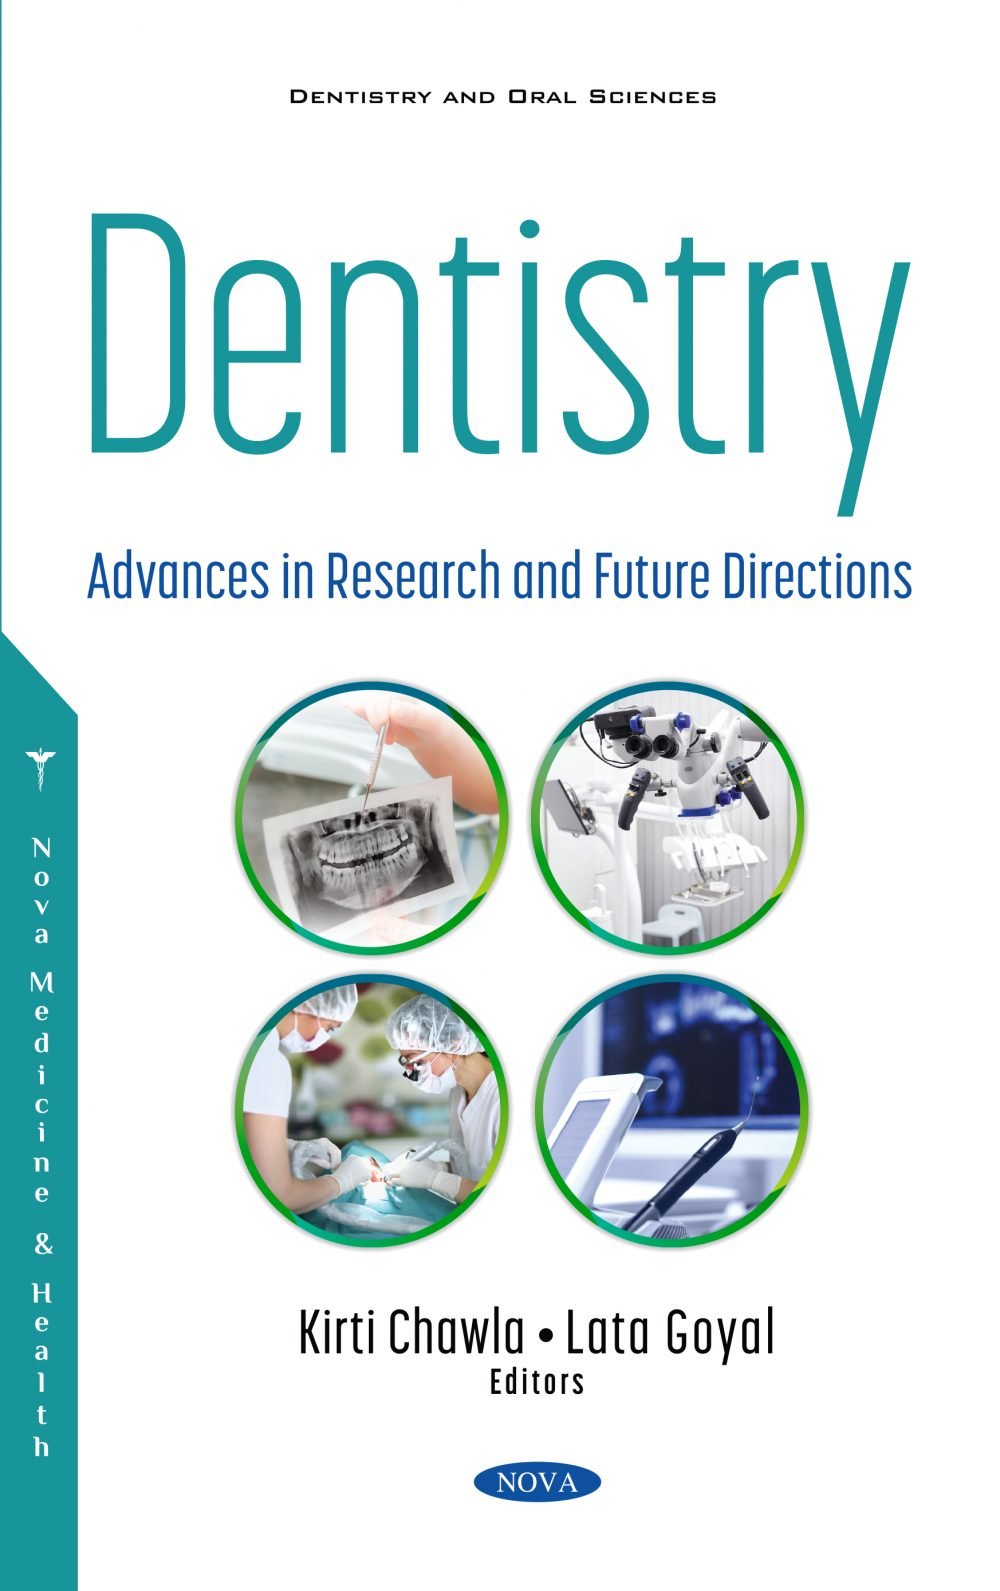 DENTISTRY: ADVANCES IN RESEARCH AND FUTURE DIRECTIONS